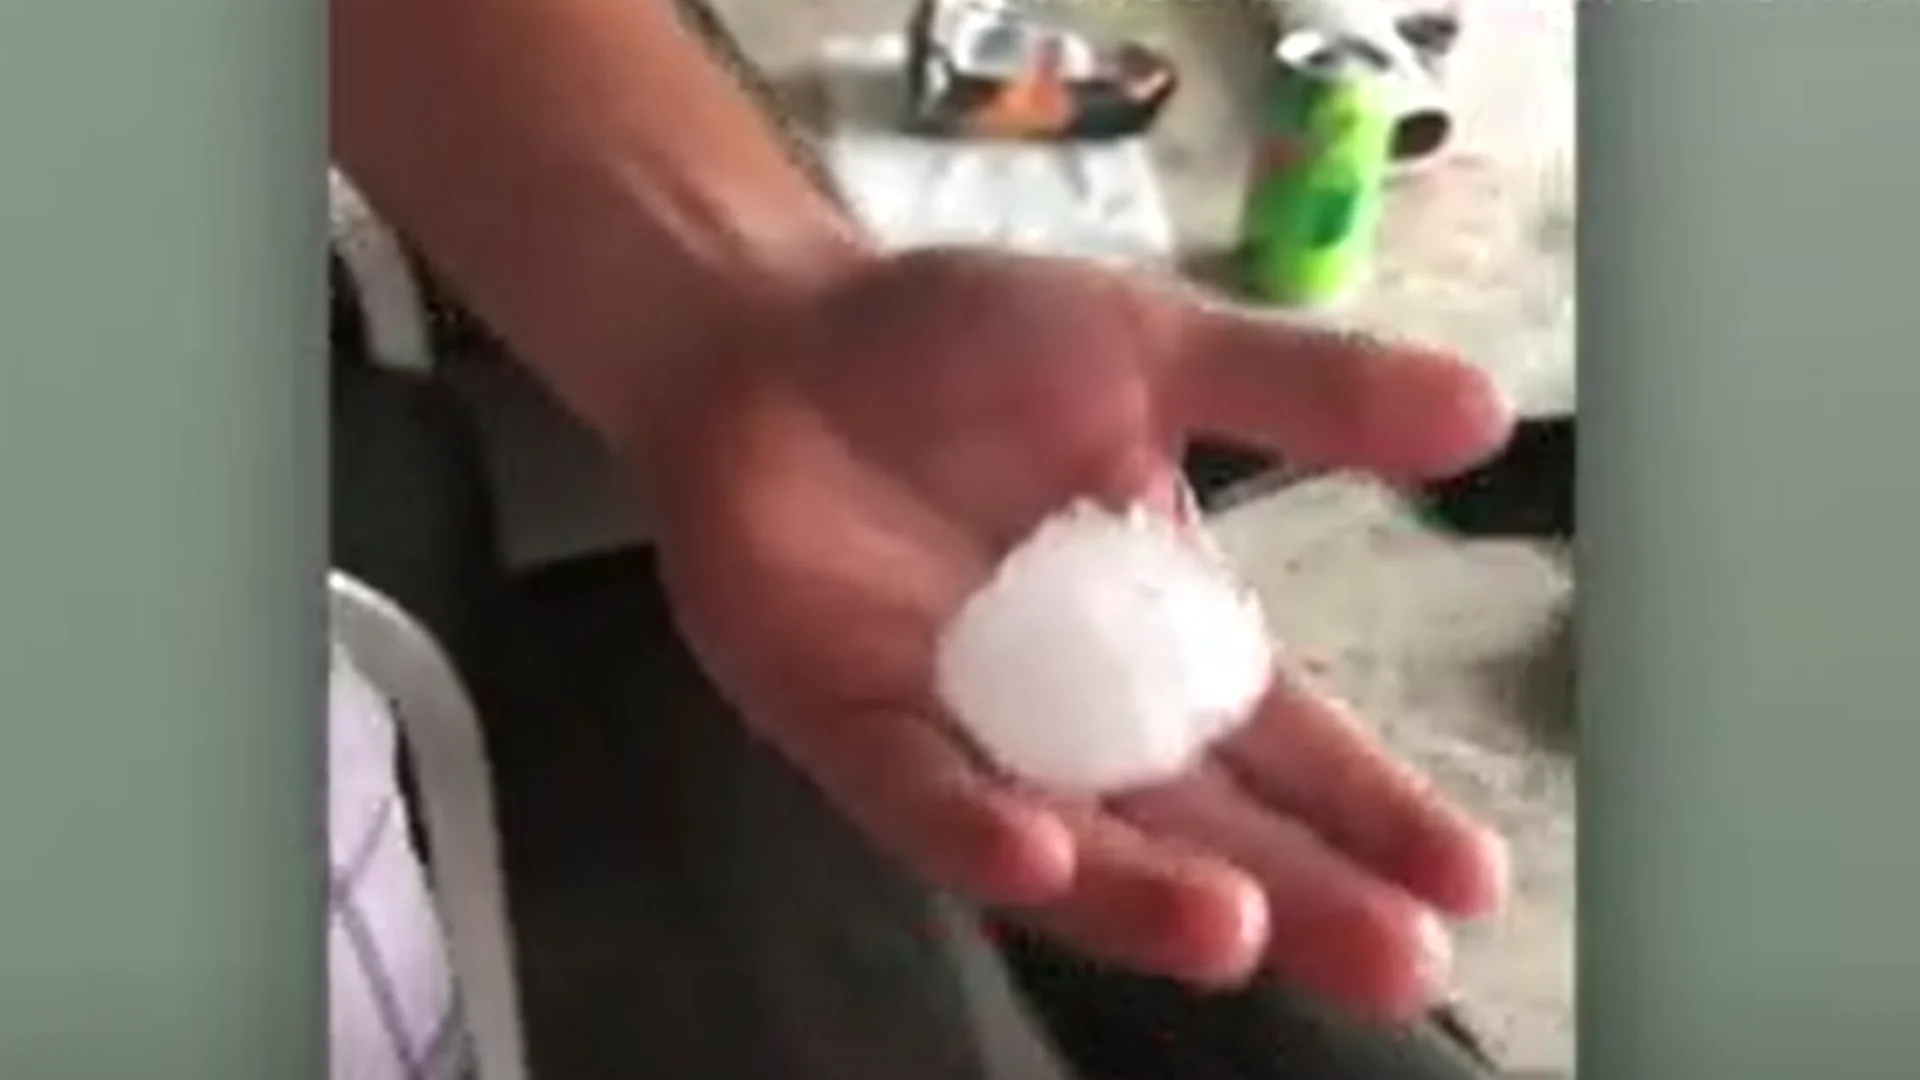 Caught on film: Golf ball-sized hail pummels boat during severe storm! See the visuals, here